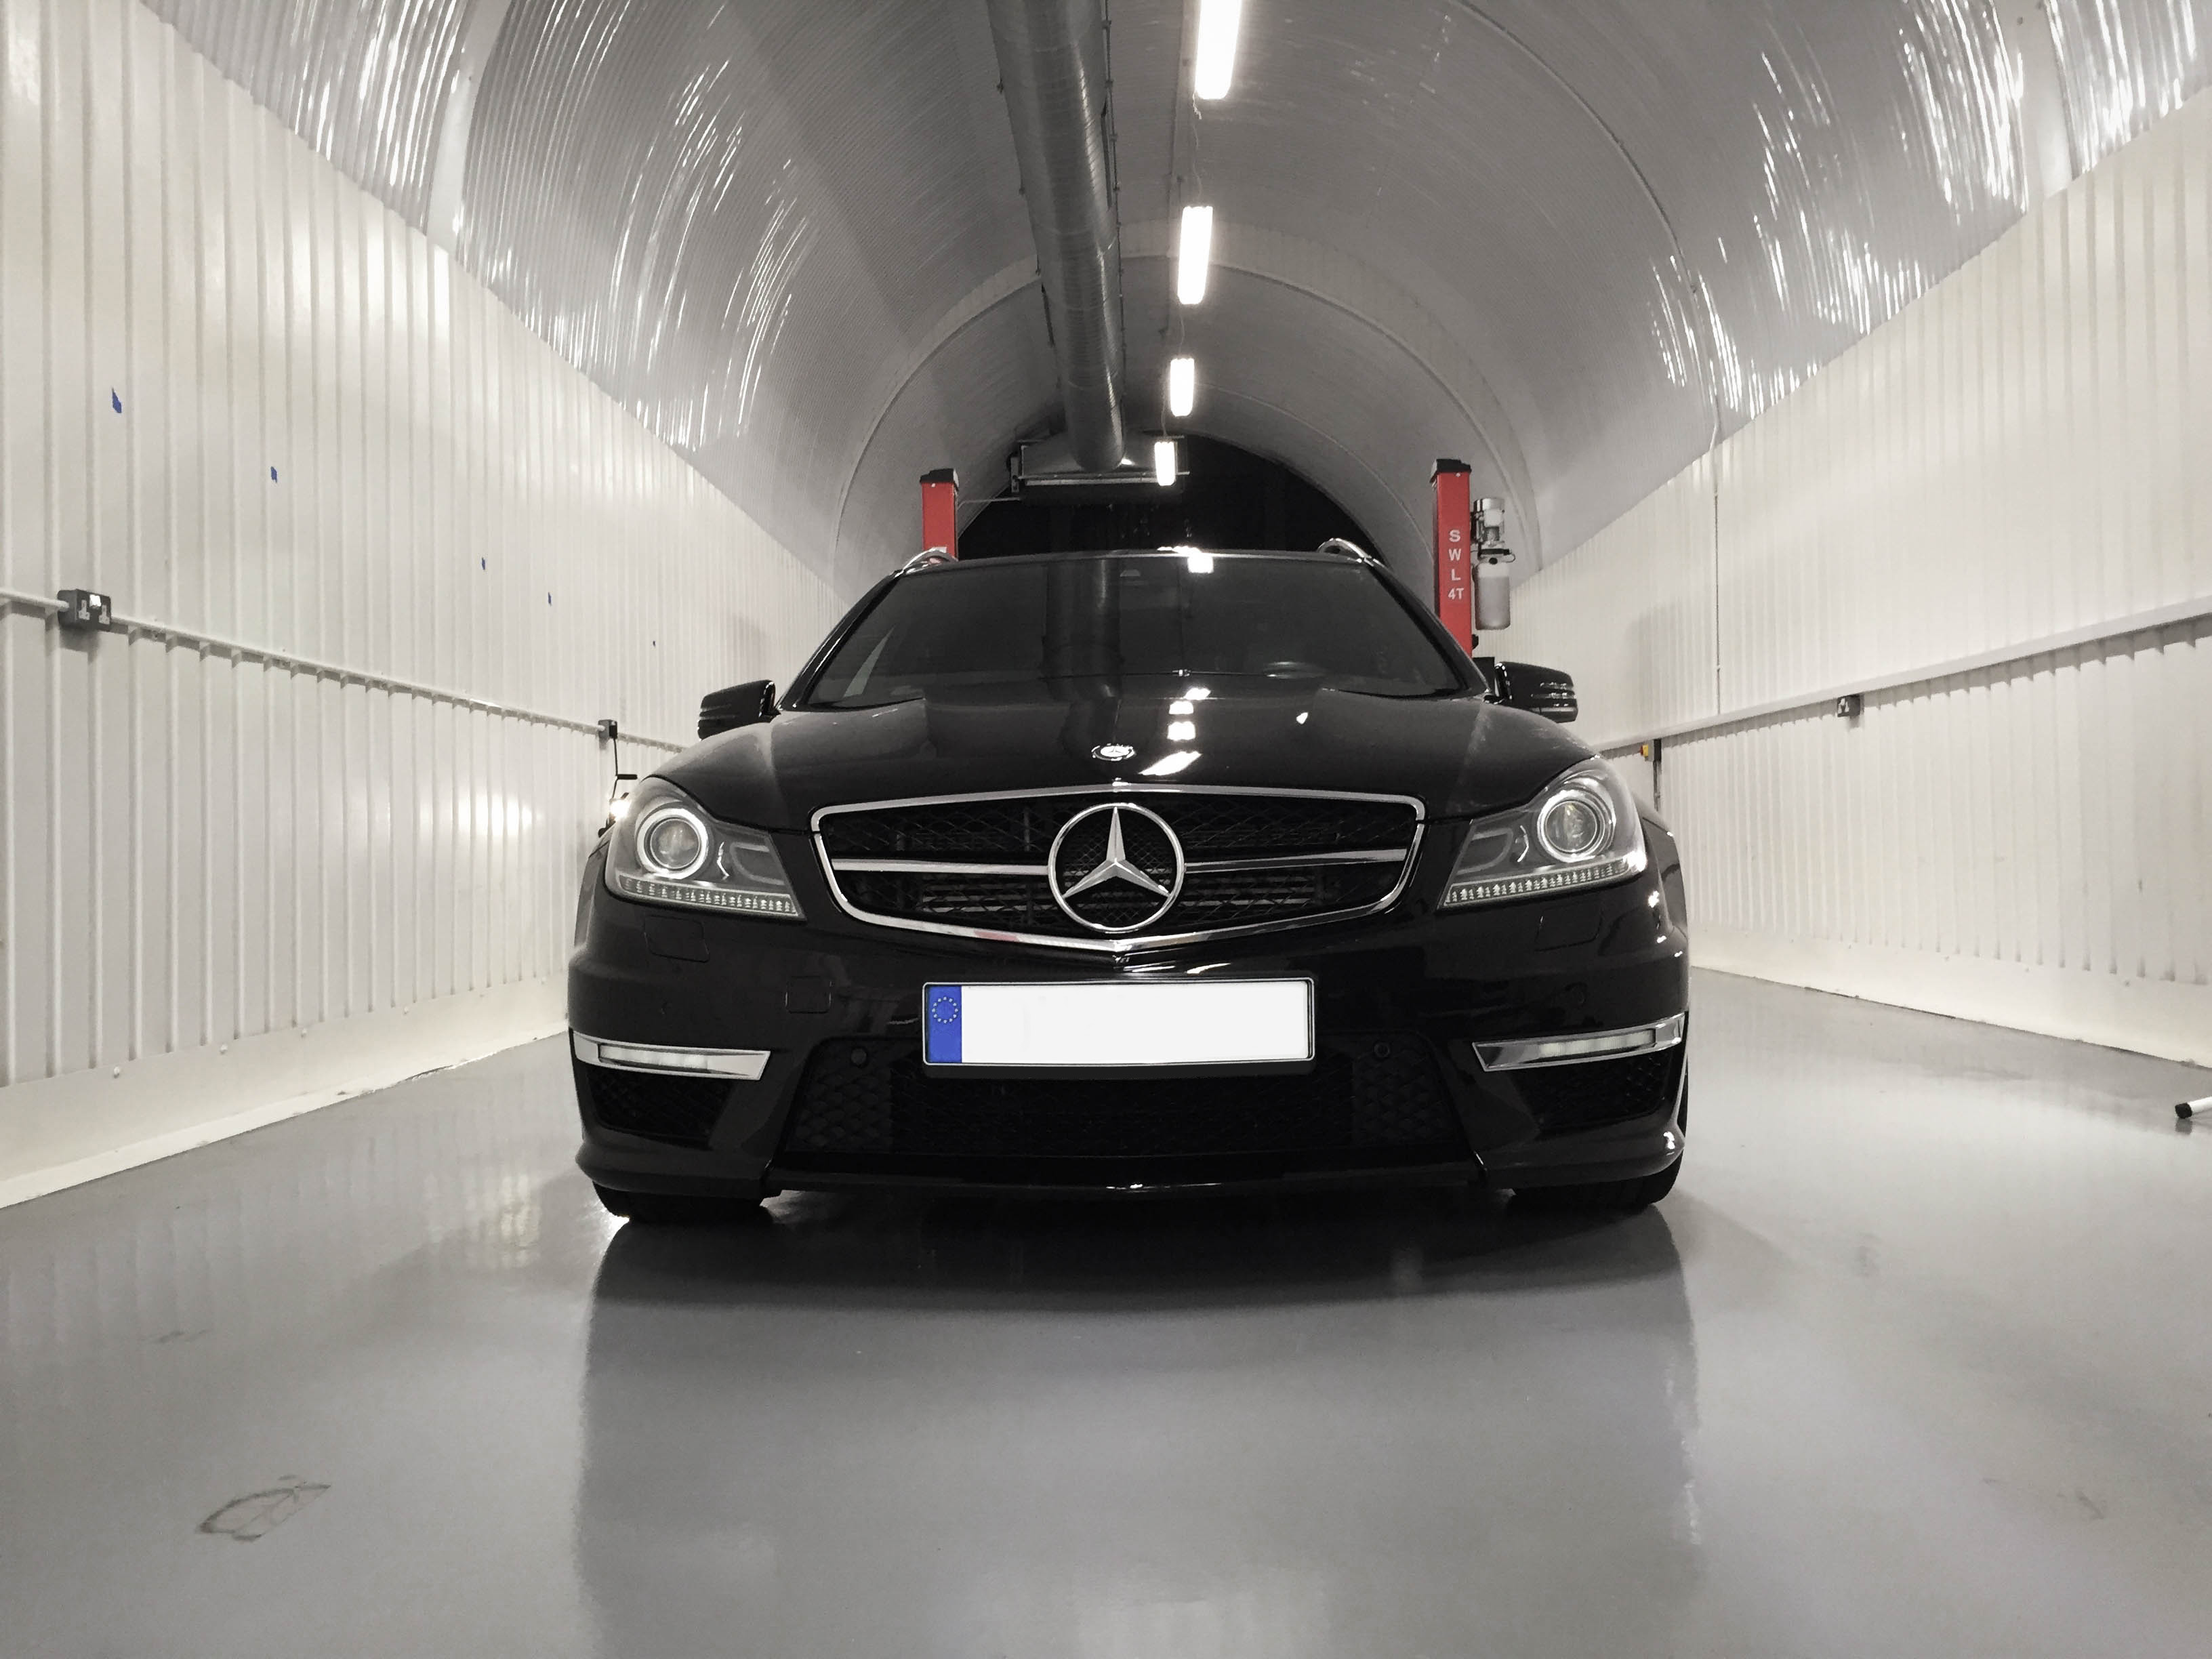 Mercedes C63 Touring –  Head on